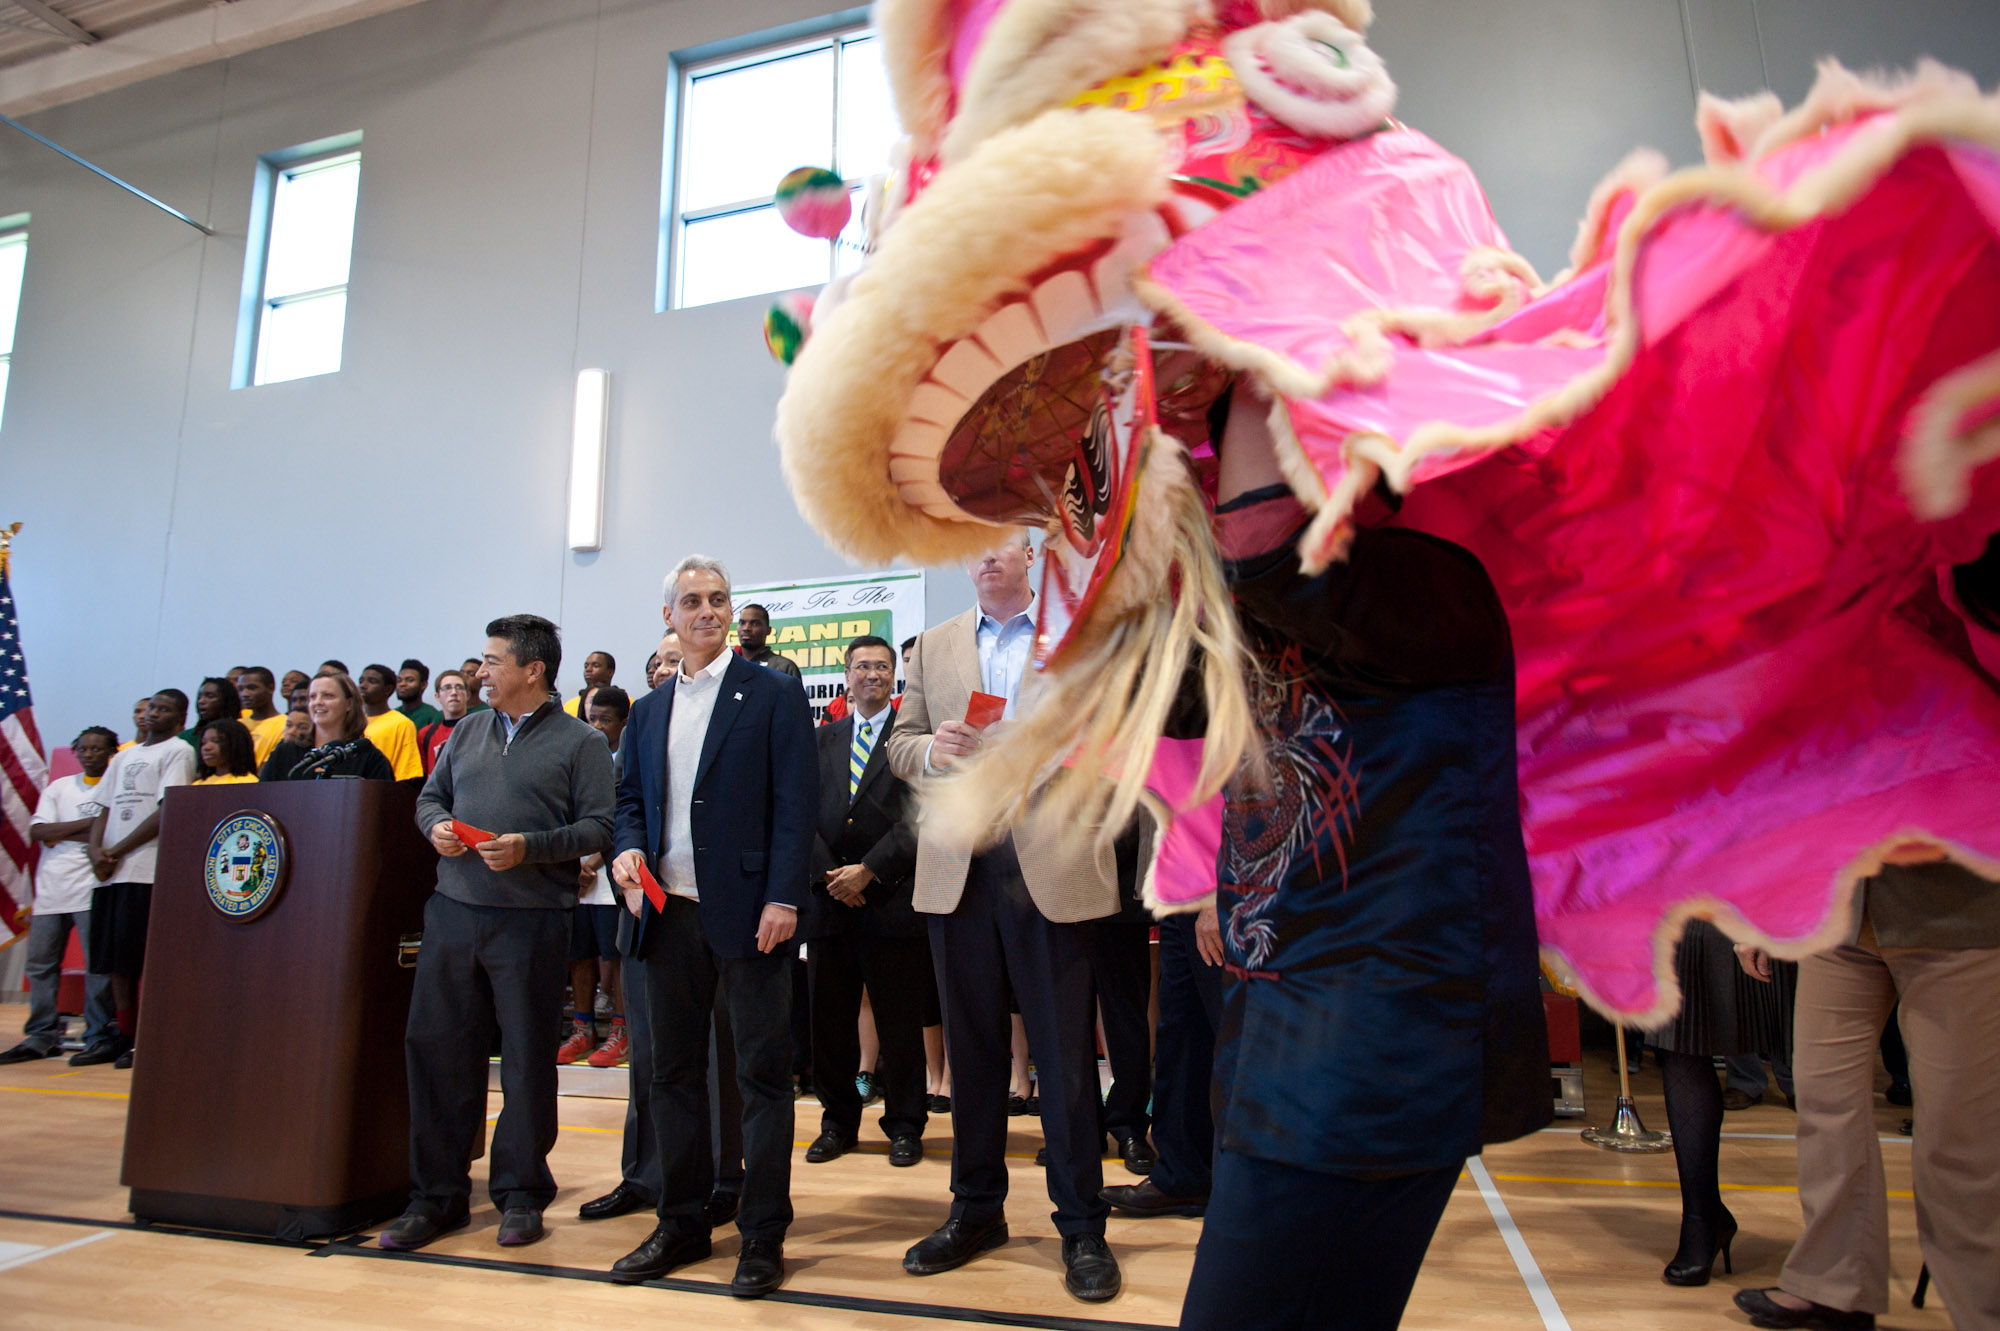 Mayor Rahm Emanuel joins members of the Chinatown and South Loop communities gathered today to celebrate the opening of the new fieldhouse at Ping Tom Memorial Park.